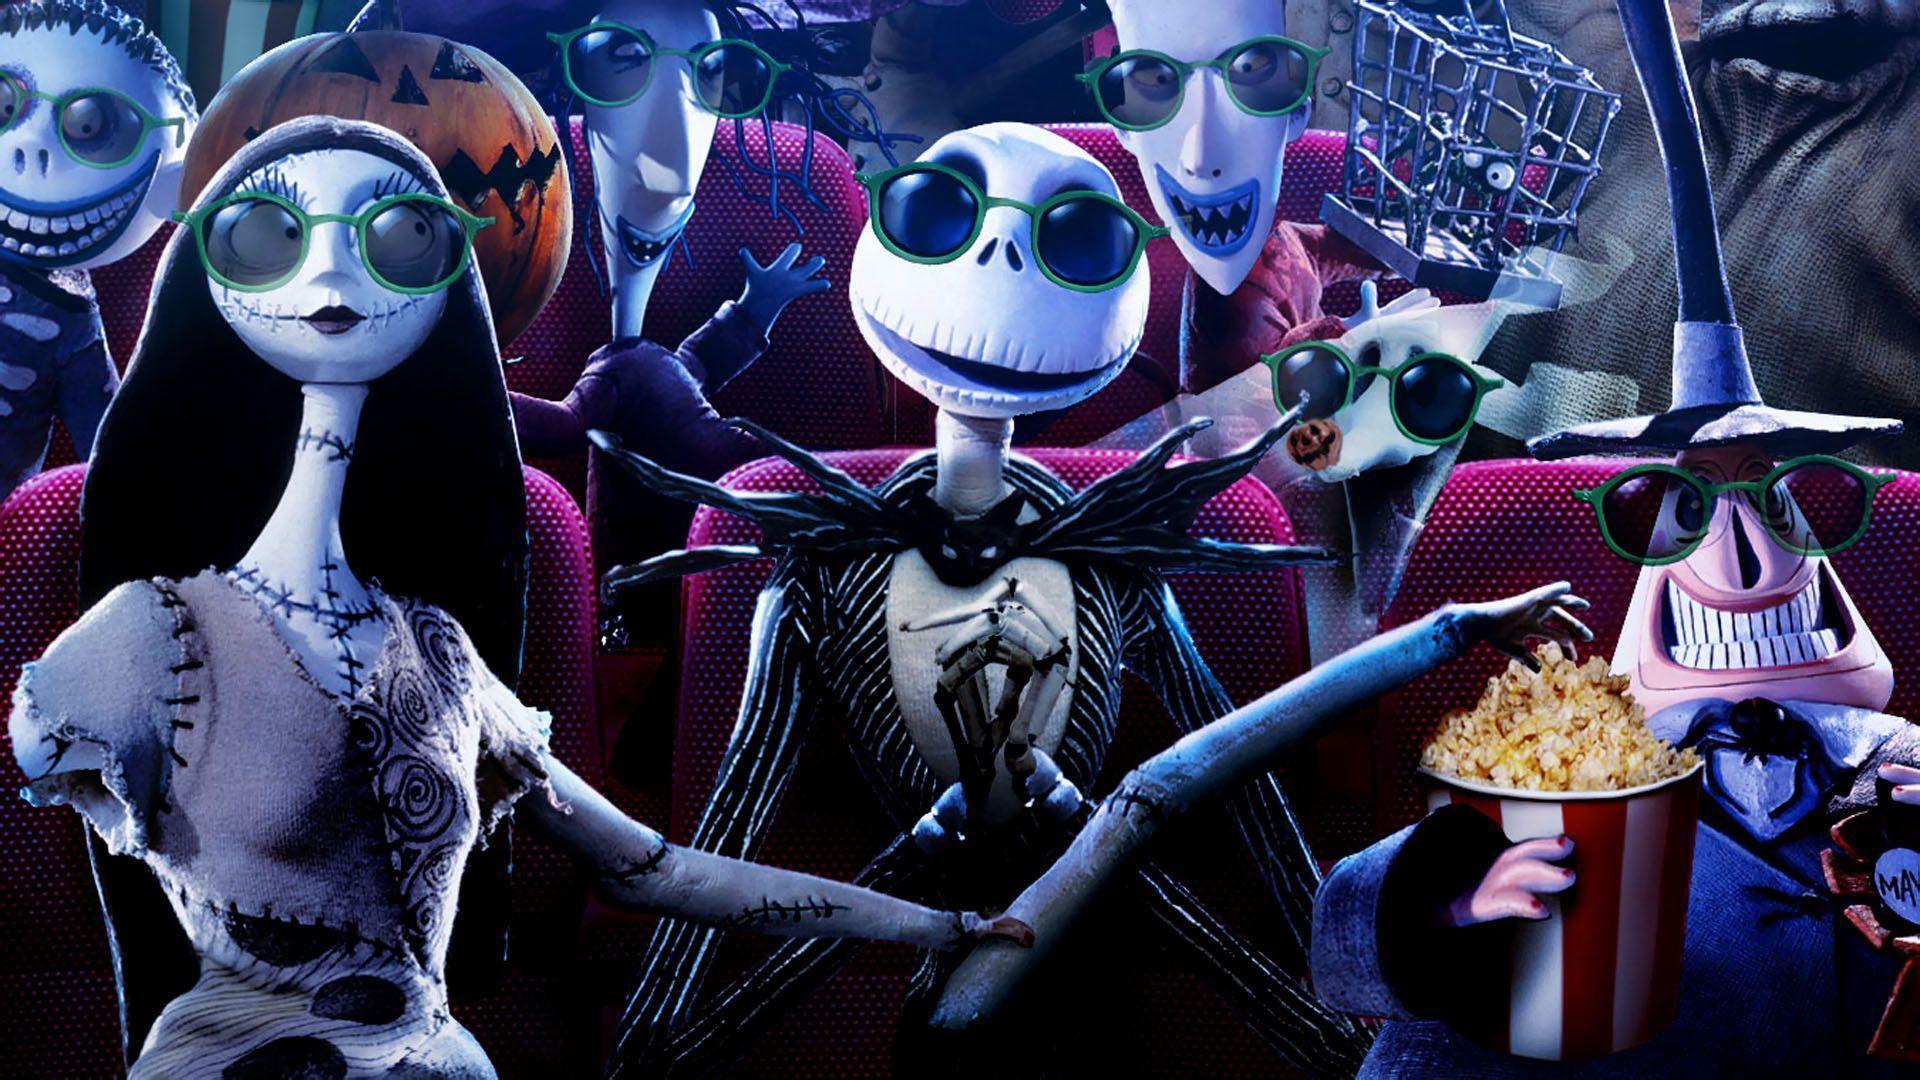 Nightmare Before Christmas Wallpapers Hd - Wallpaper Cave